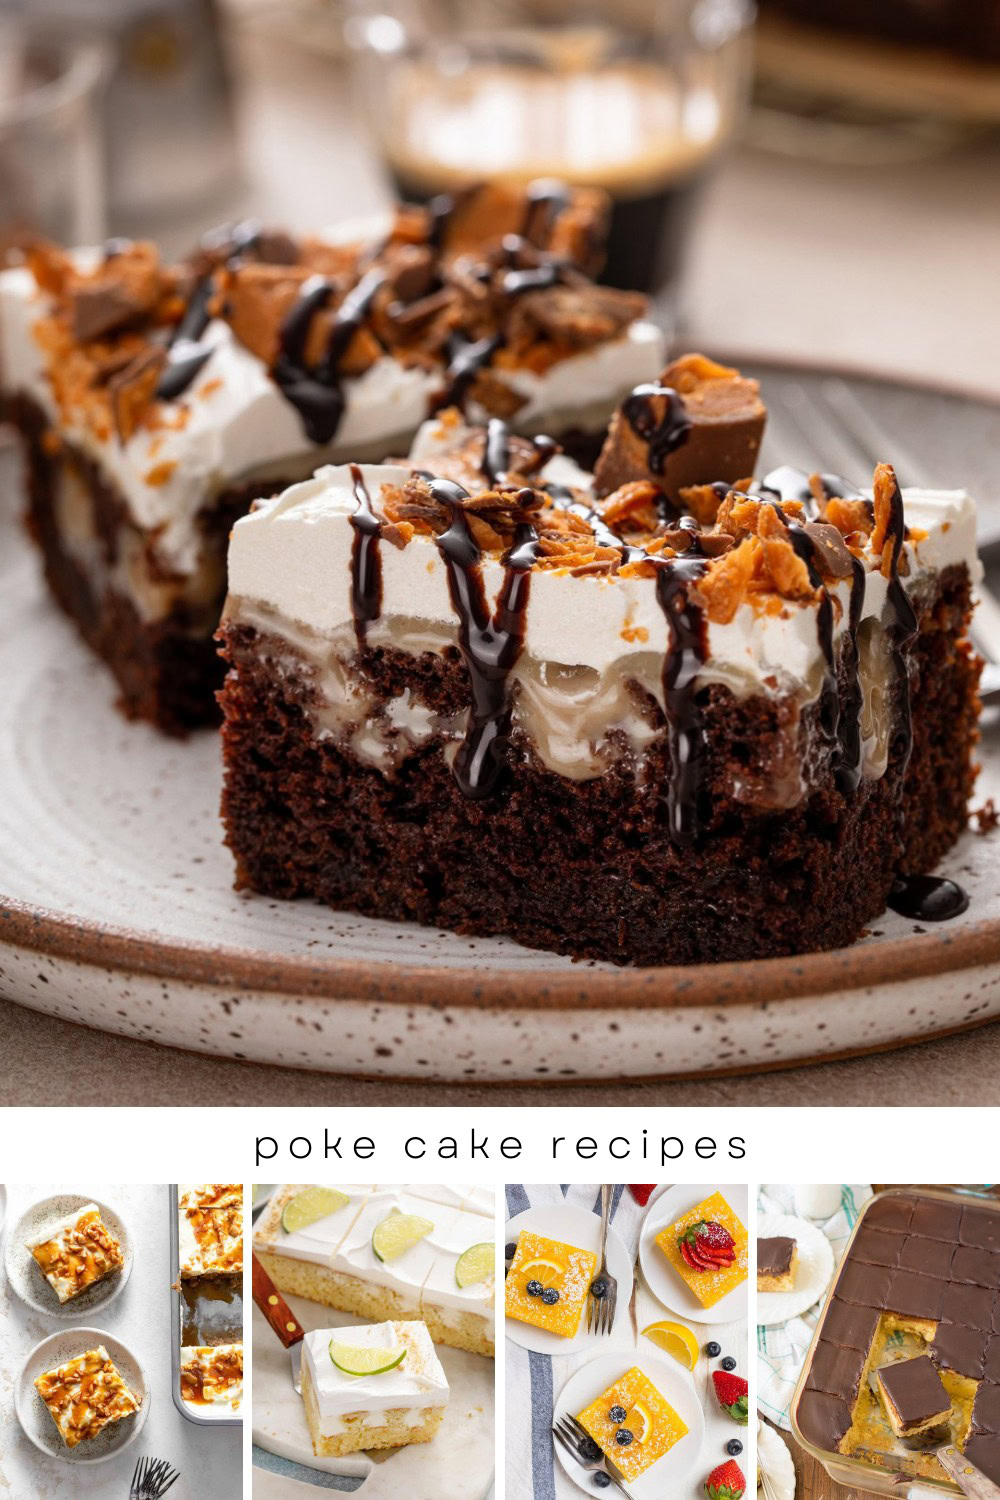 Love poke cakes? You'll adore our new roundup of 10 mouth-watering recipes! 😍 From Key Lime to Caramel Apple, these cakes are easy to make and bursting with flavor. Perfect for any celebration or a sweet treat. Dive in and get baking! 🍰 #Baking #PokeCake #DessertGoals